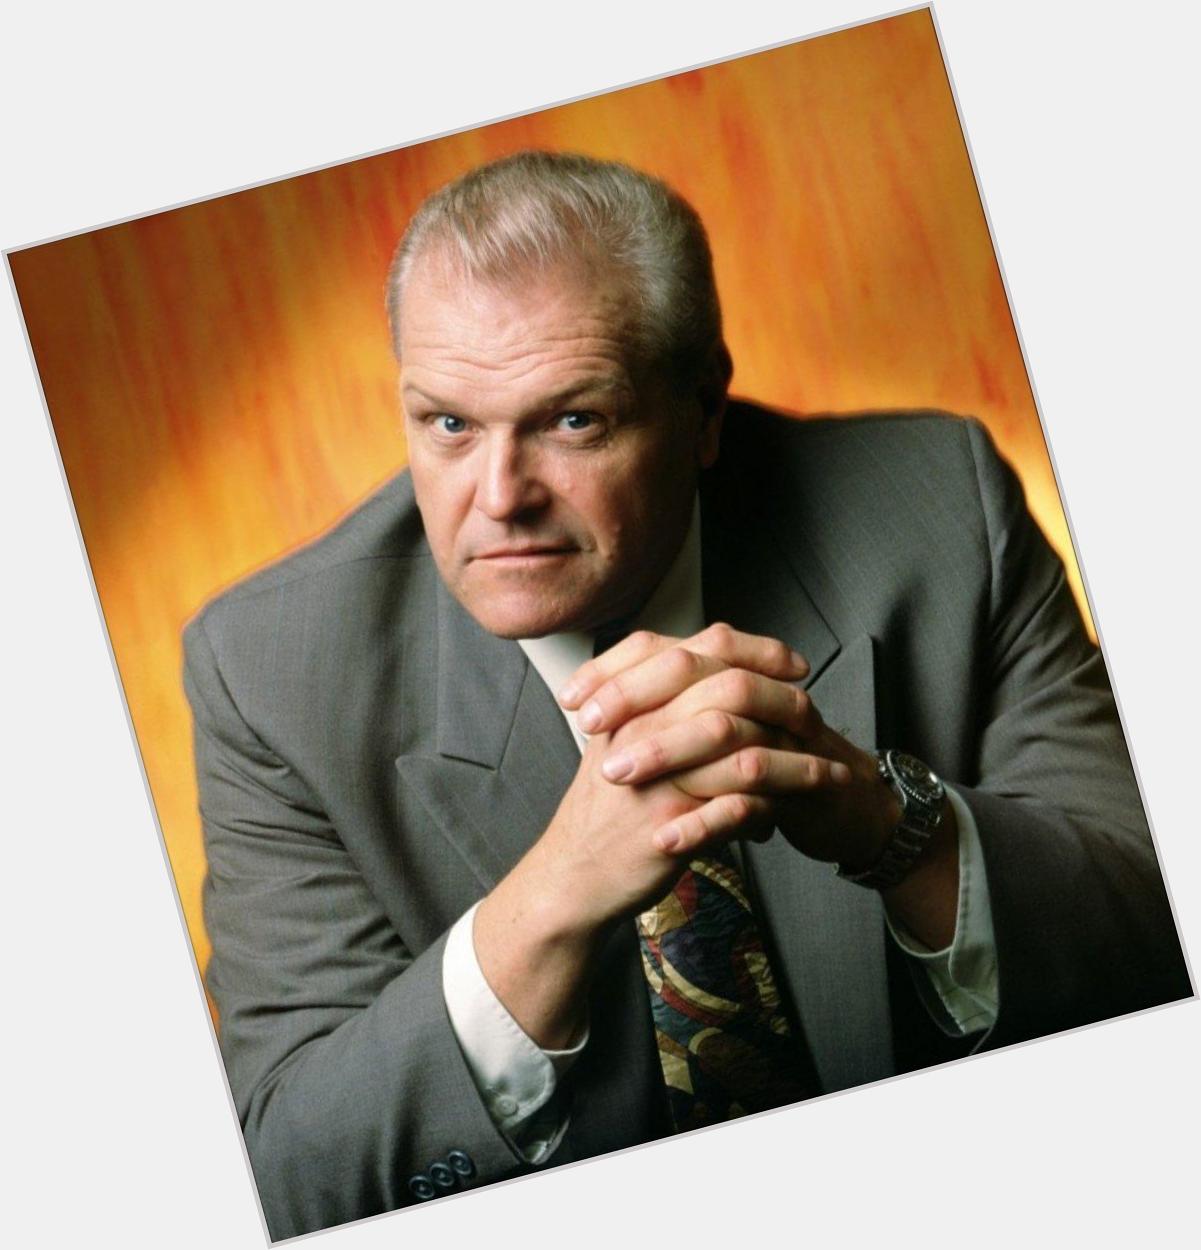 HAPPY 76th Bday BRIAN DENNEHY

You\ve been in a buttload of movies sir! What comes to mind 1st when u hear DENNEHY? 